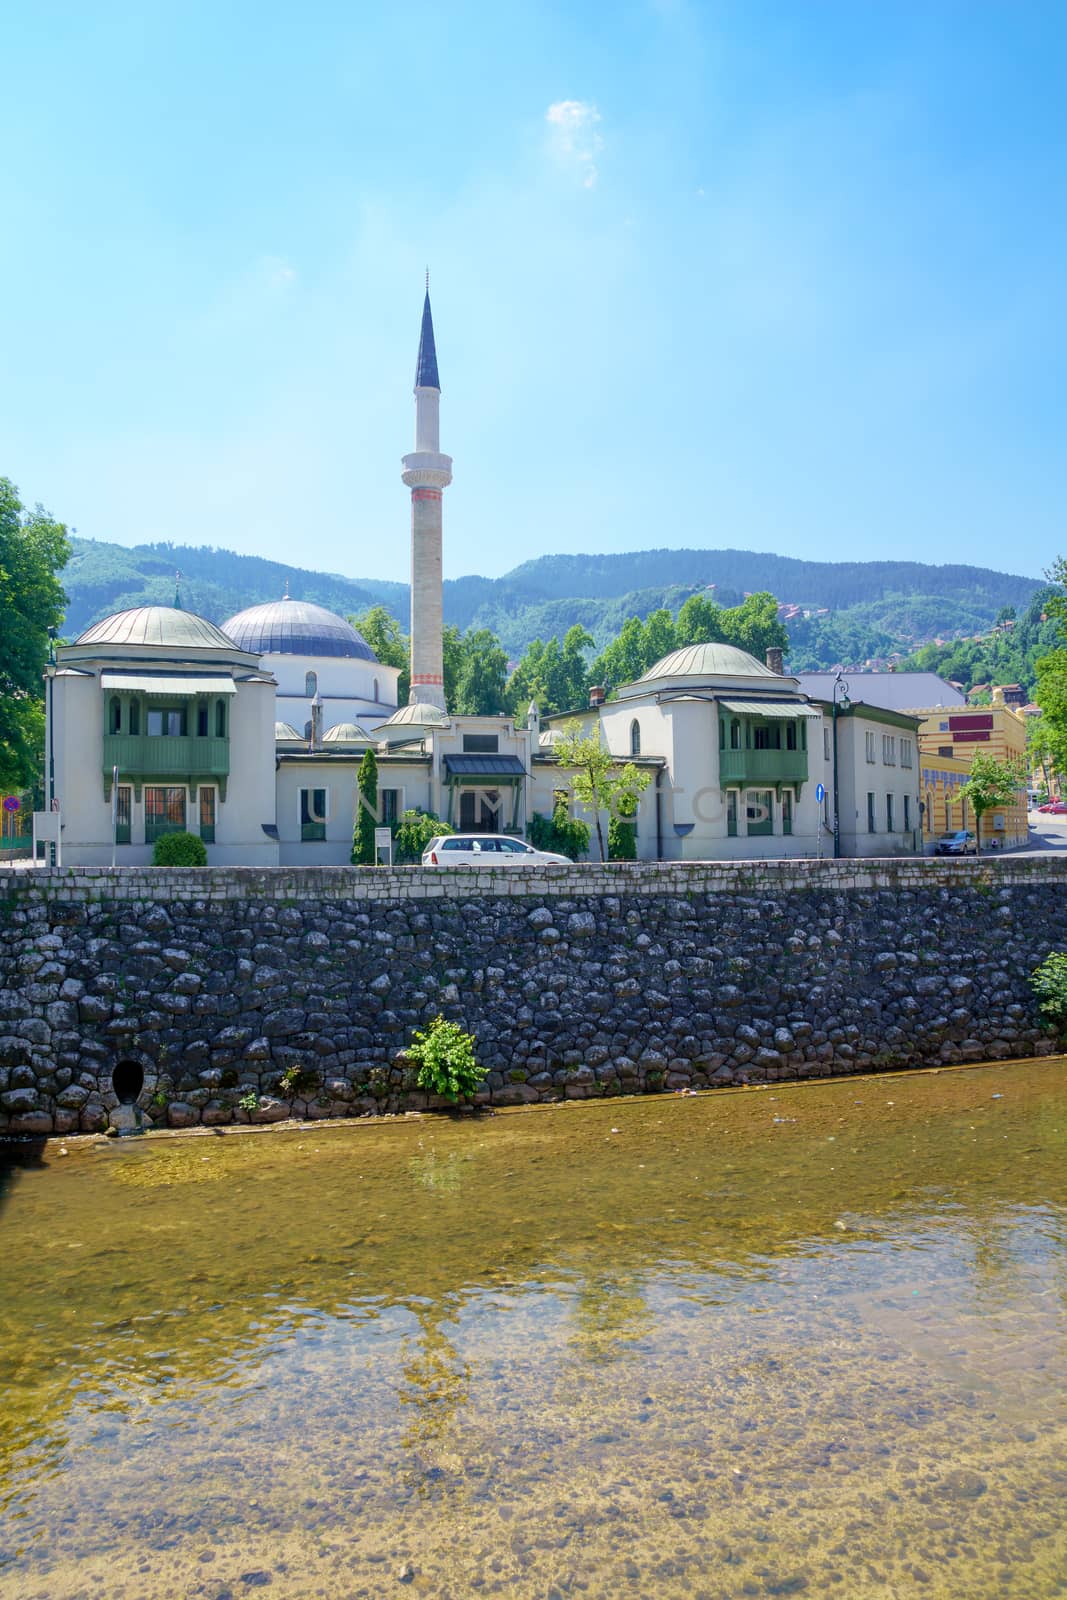 The Tabacki mesdzid Mosque in Sarajevo by RnDmS